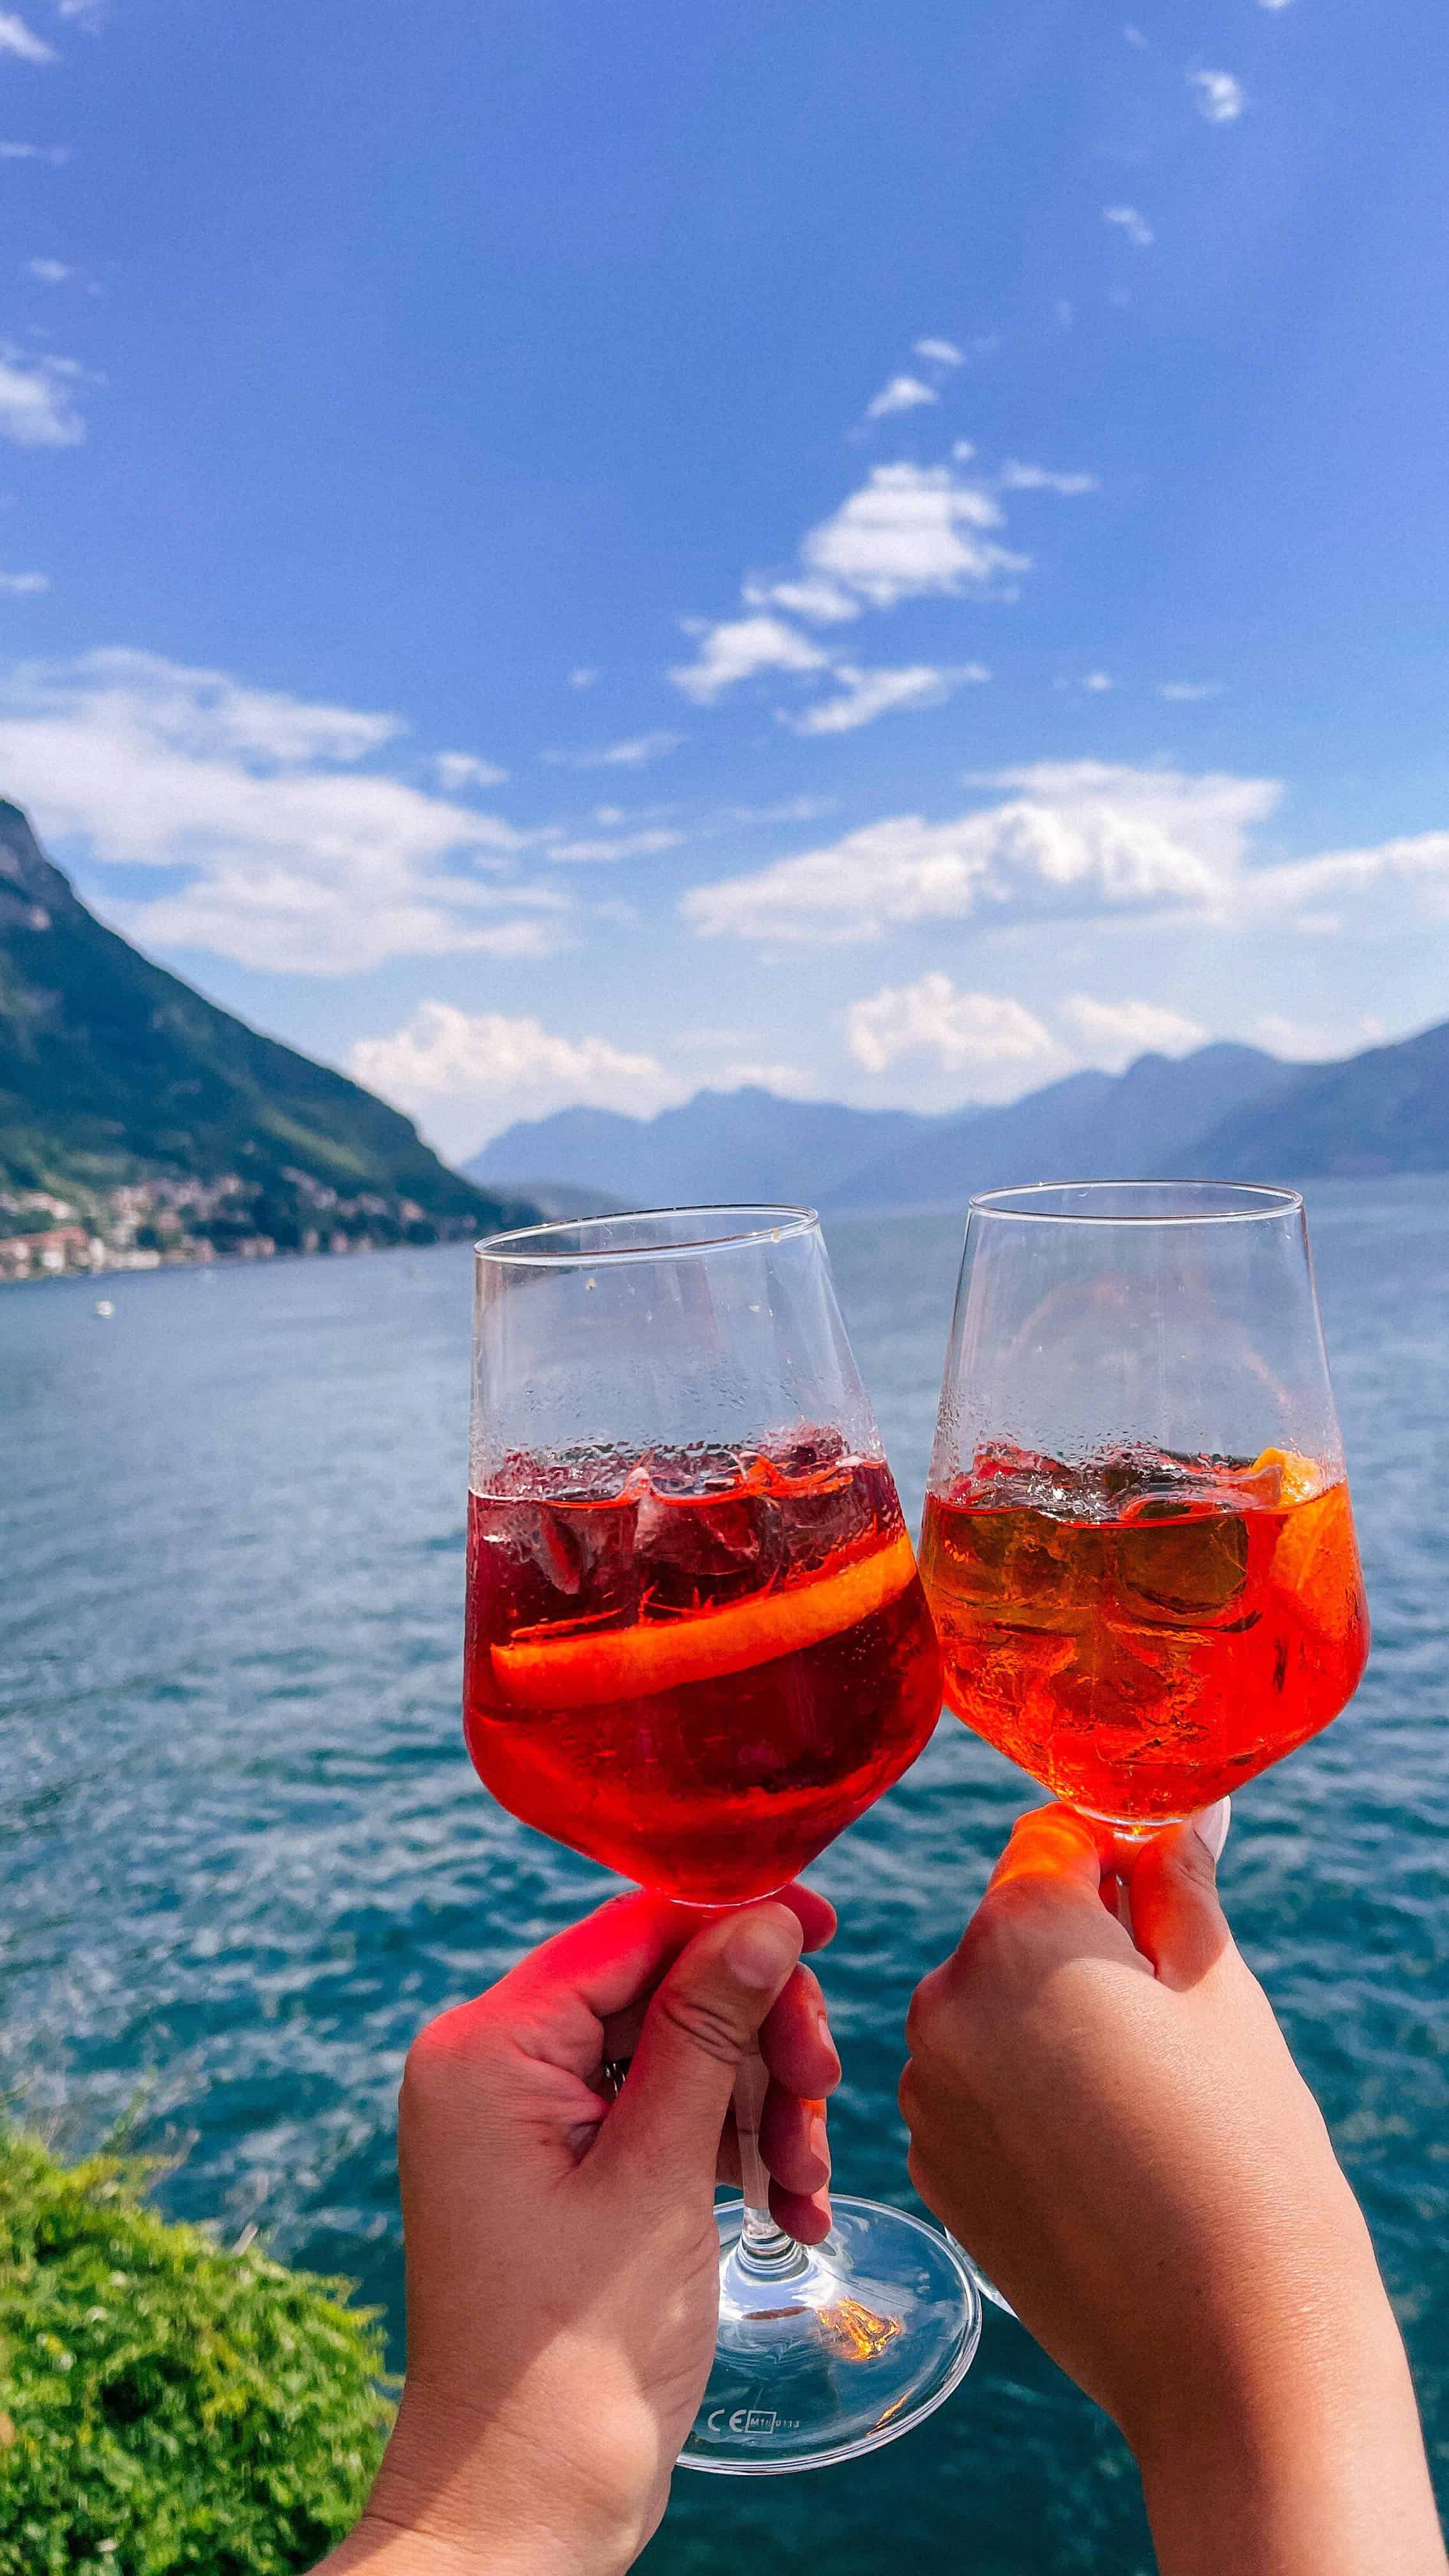 What’s Italy without a few spritzes? 🍹
Spritzes you can order in Italy are:
🧡Aperol Spritz (duh!)
❤️Campari Spritz (my fav & more bitter)
💛Limoncello Spritz (in Amalfi Coast)
💚Hugo Spritz (Elderflower!)
💙Amalfi Spritz (in Amalfi - tastes like blue lol)
Any other spritzes I missed? 🥂 Can we bring Spritz O’Clock (apertivo culture) to the US please? K thx! 😇
Save this and order one next time you visit! 🇮🇹 
#laurellovesitaly #italy #summerinitaly #eurosummer #spritzoclock #eurotrip #italytravel #aperolspritztime #apertivo #visititaly #camparispritz #limoncellospritz #drinksintheair #dametravelerfoodie